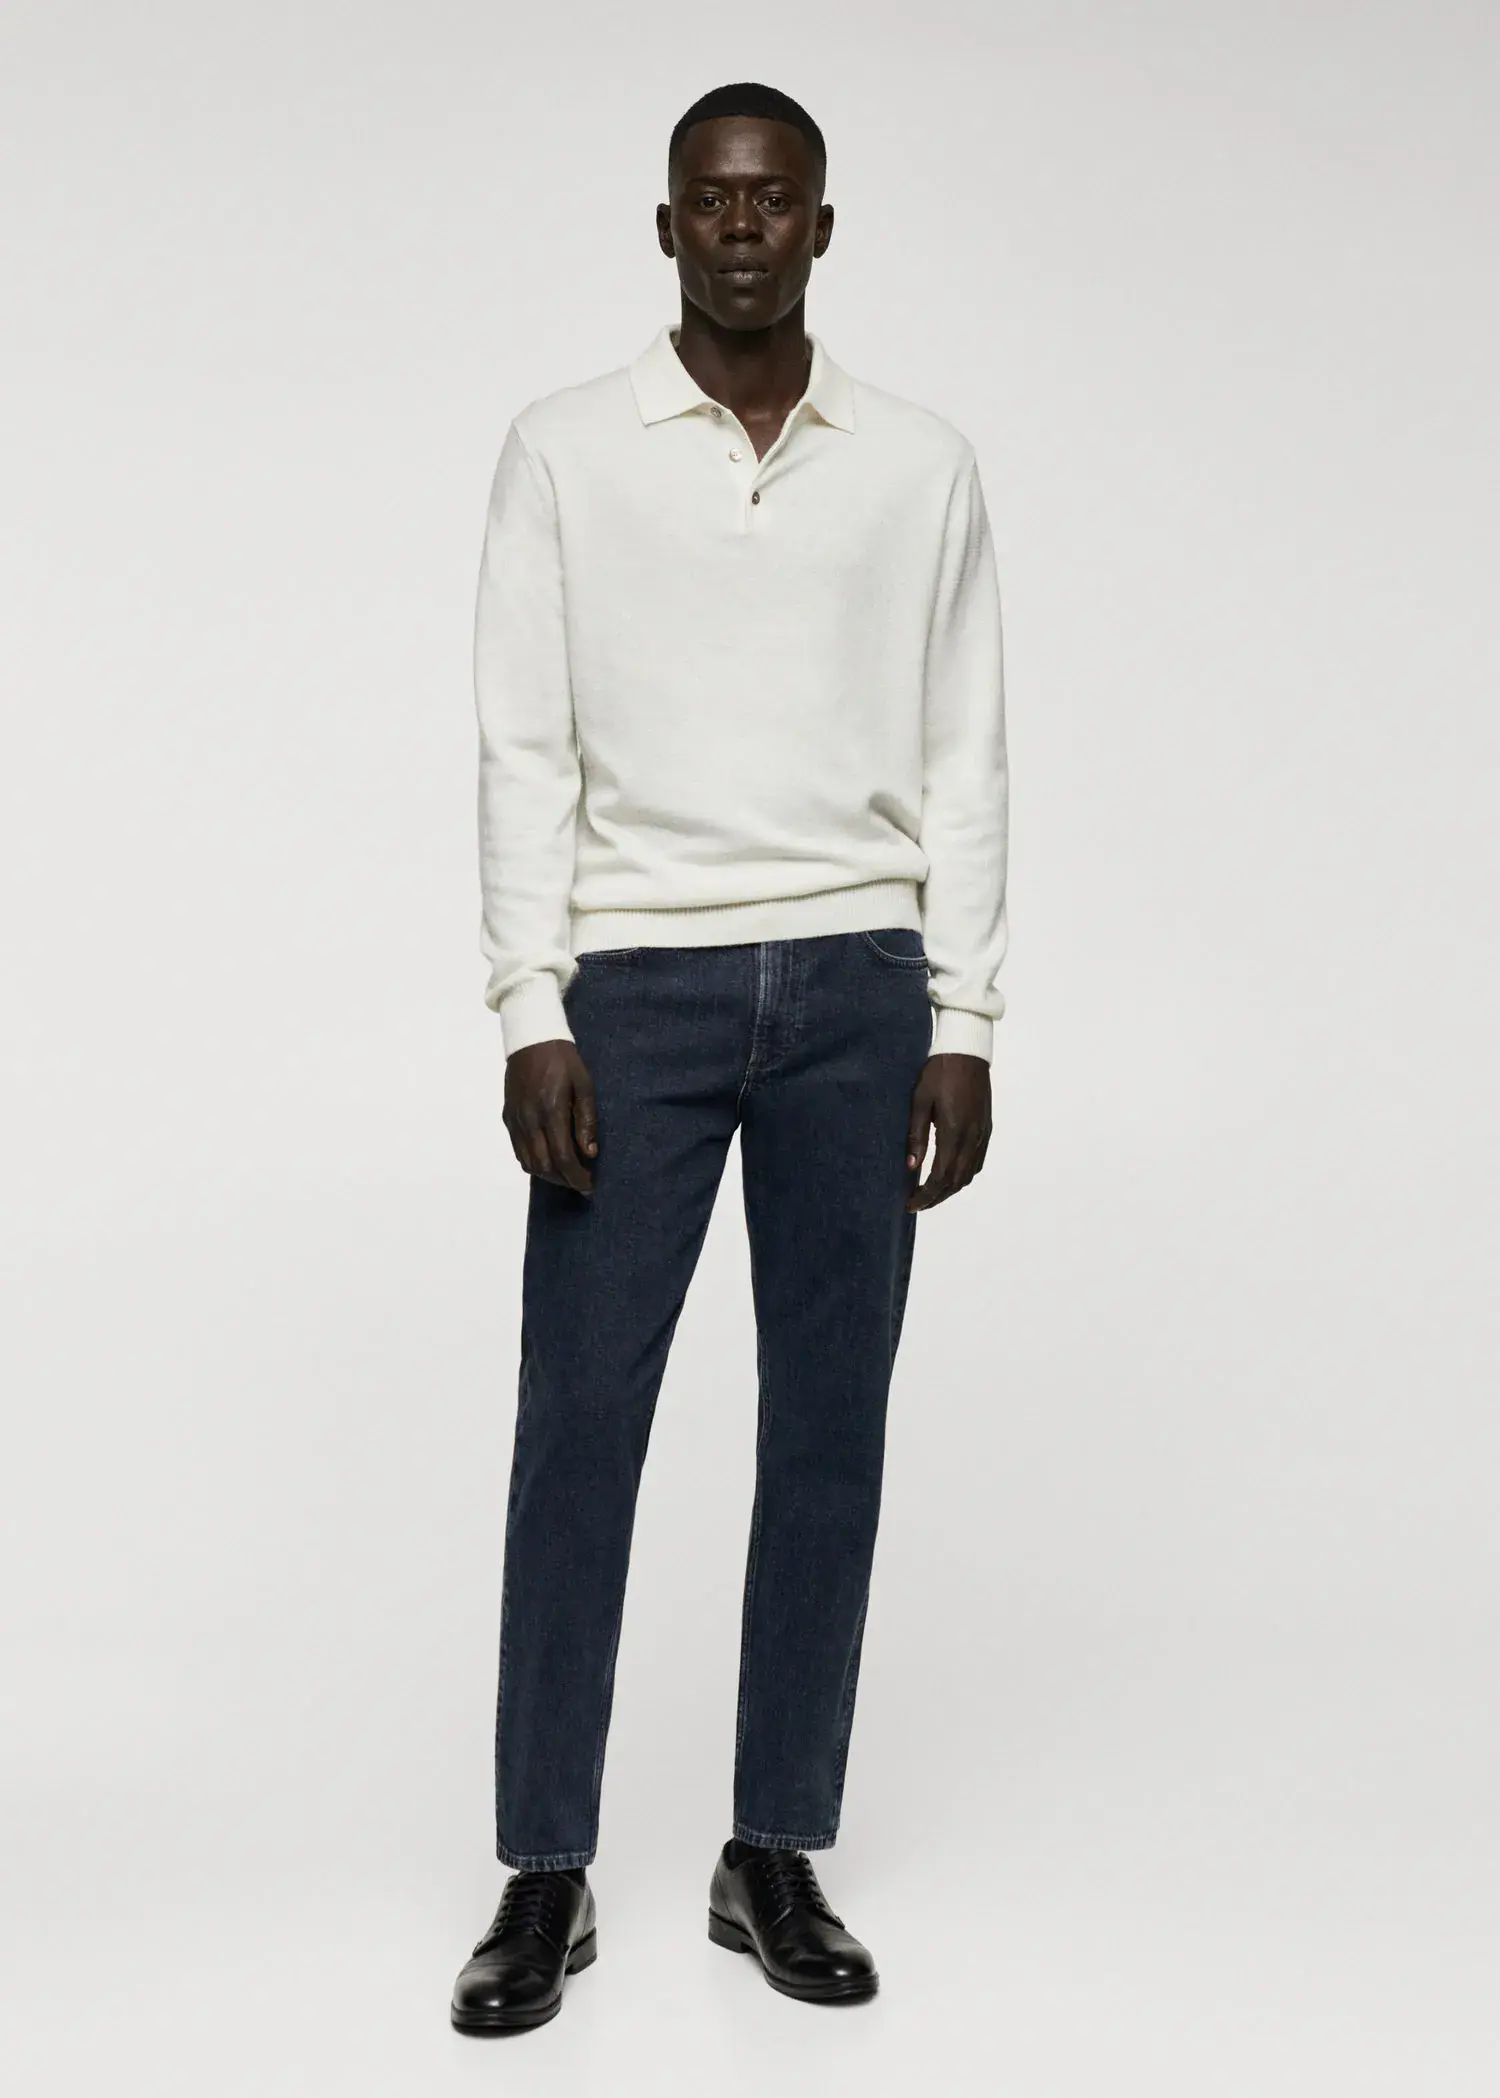 Mango Ben tapered cropped jeans. 1